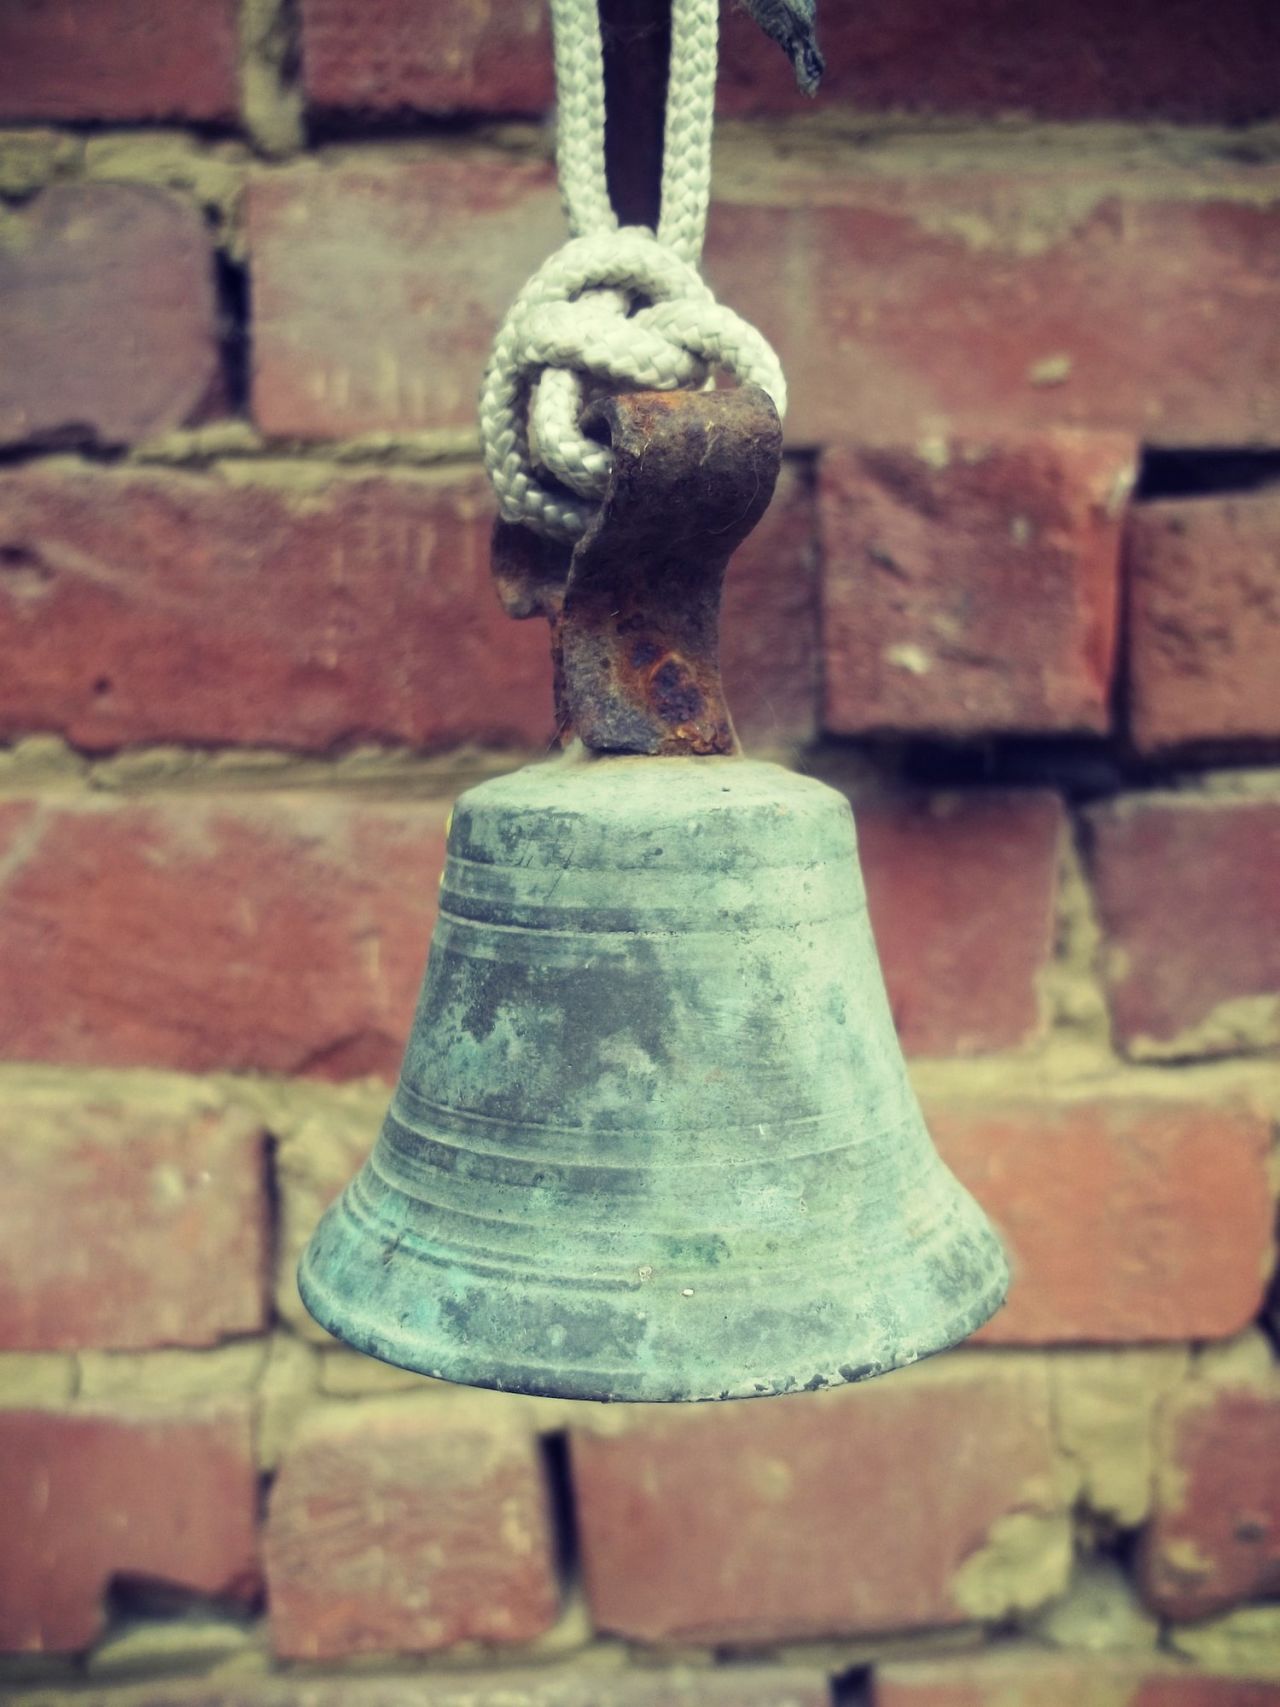 Old rusted bell | Photo/Image by JelenaCordis | Fliiby